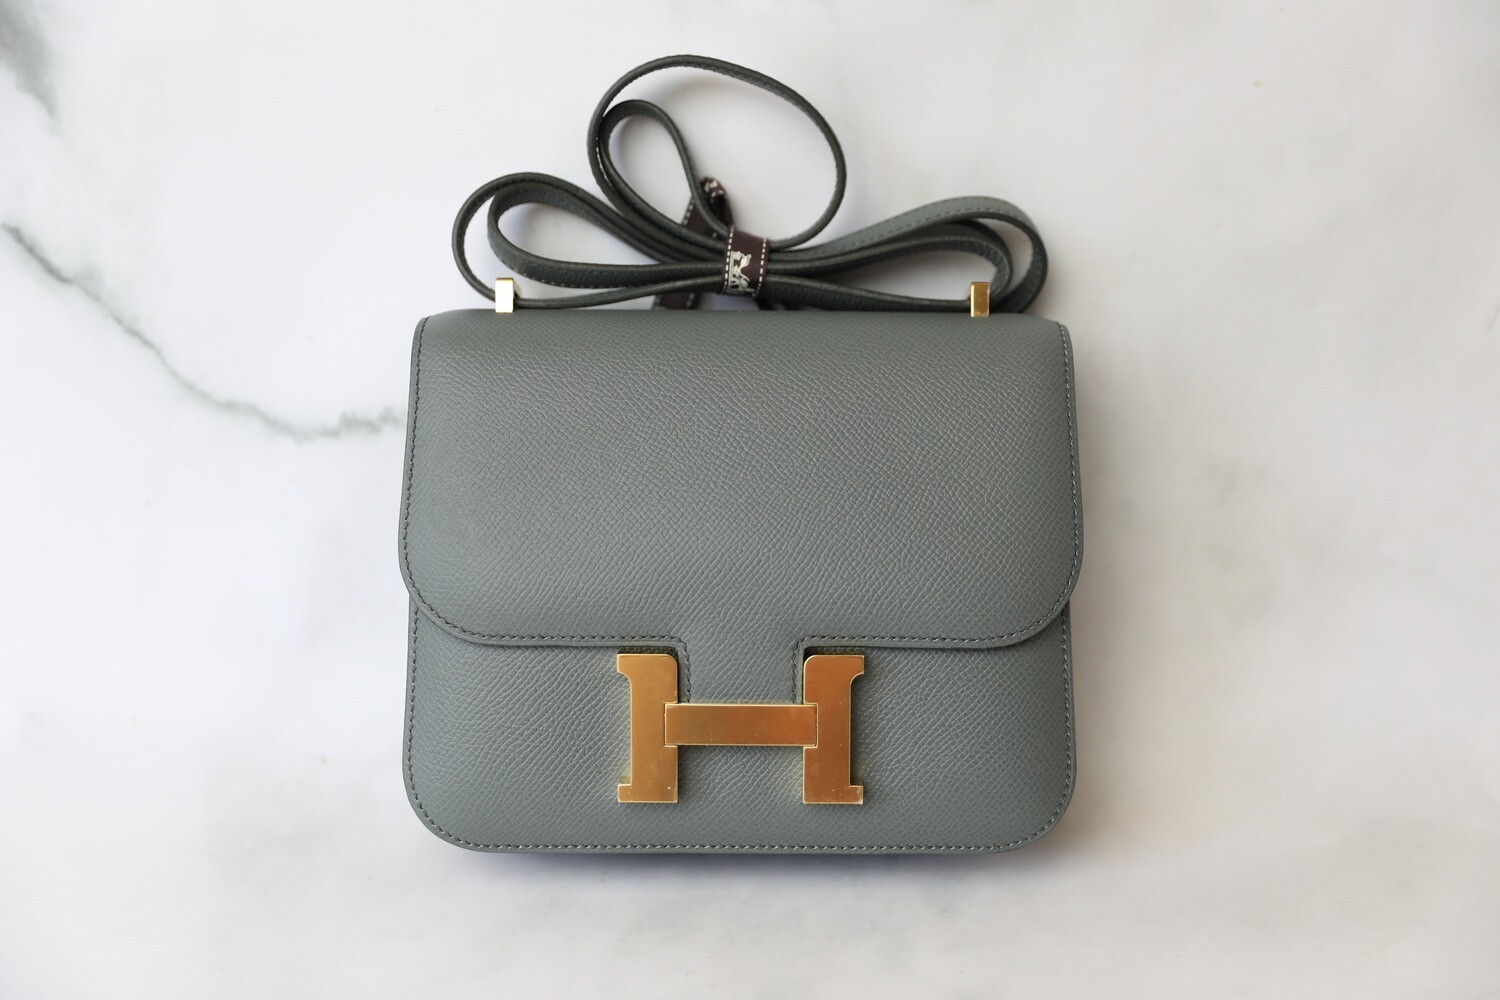 Hermes Constance 18, Vert Amande Epsom with Gold Hardware, New in Box WA001